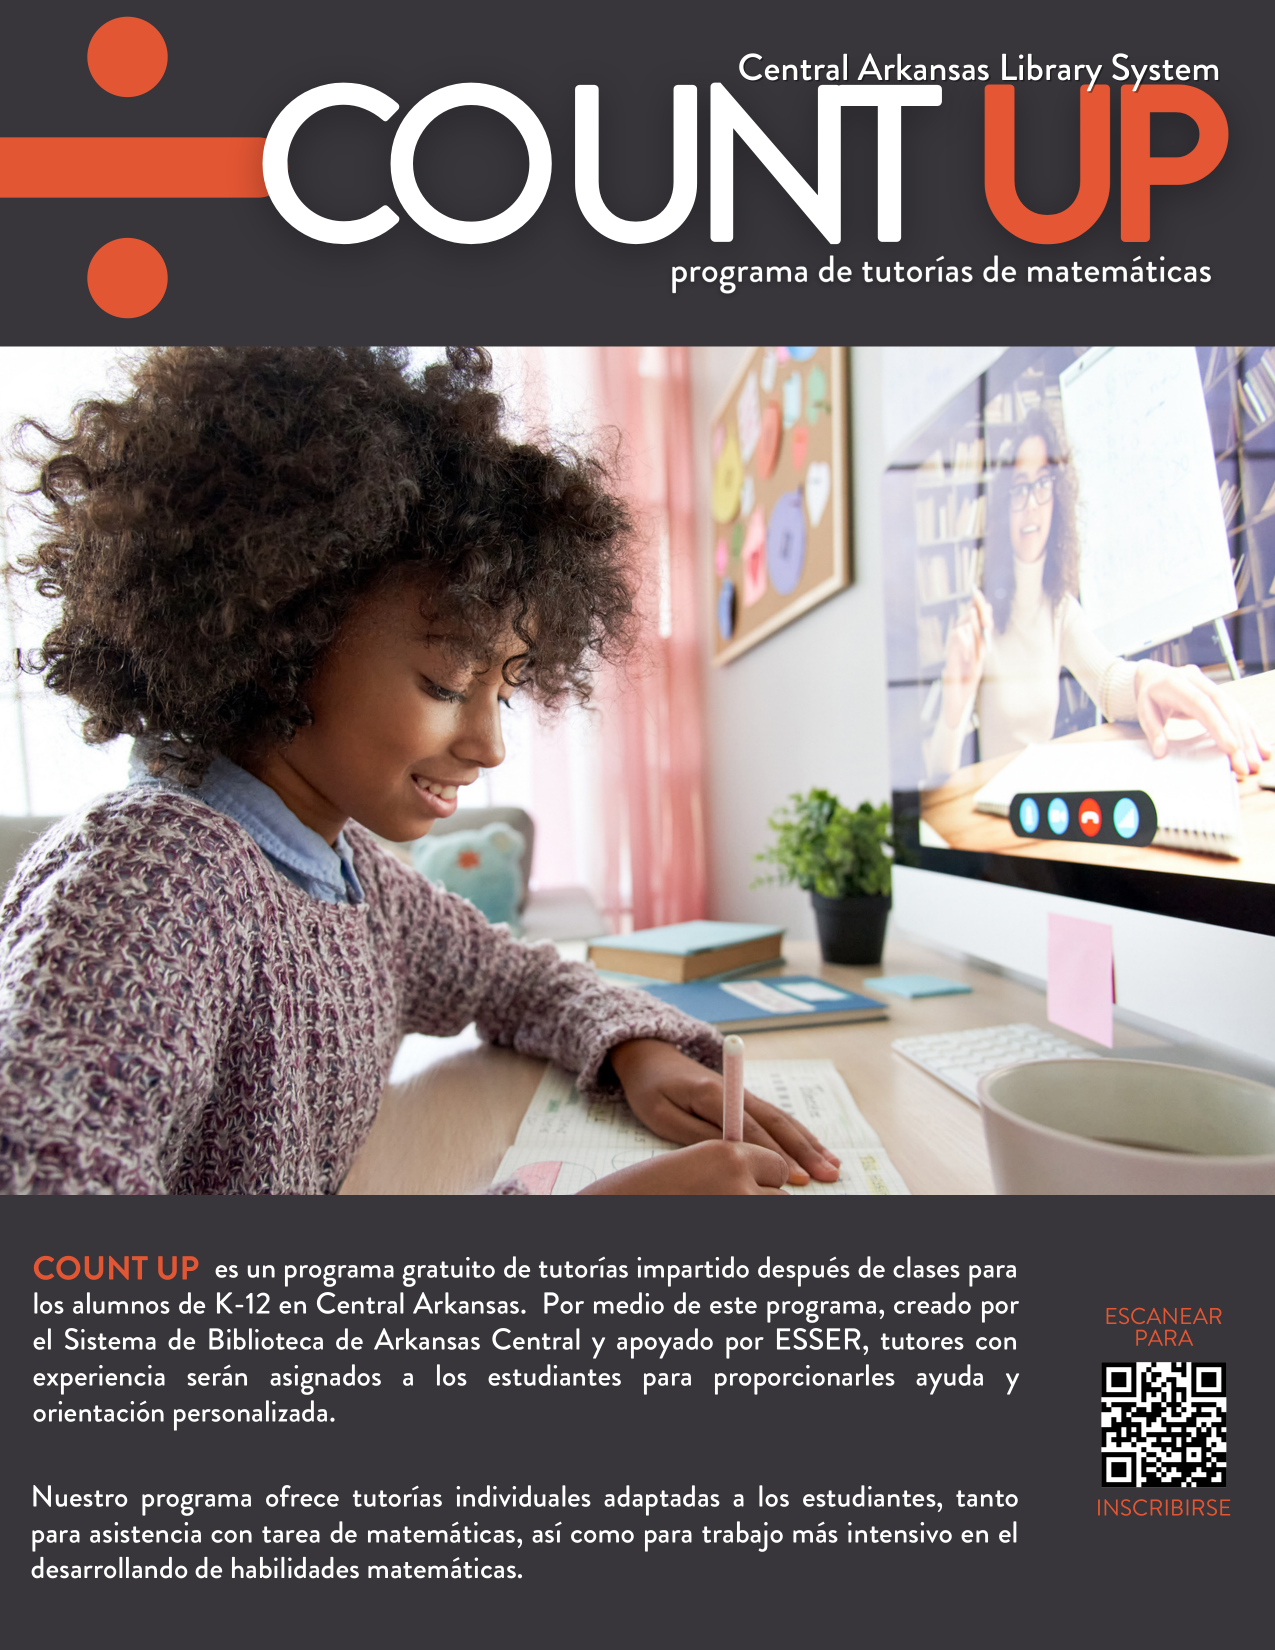 Header reads Count UP math tutoring program. Image is a child holding pencil and paper sitting in front of a computer screen for online tutoring.